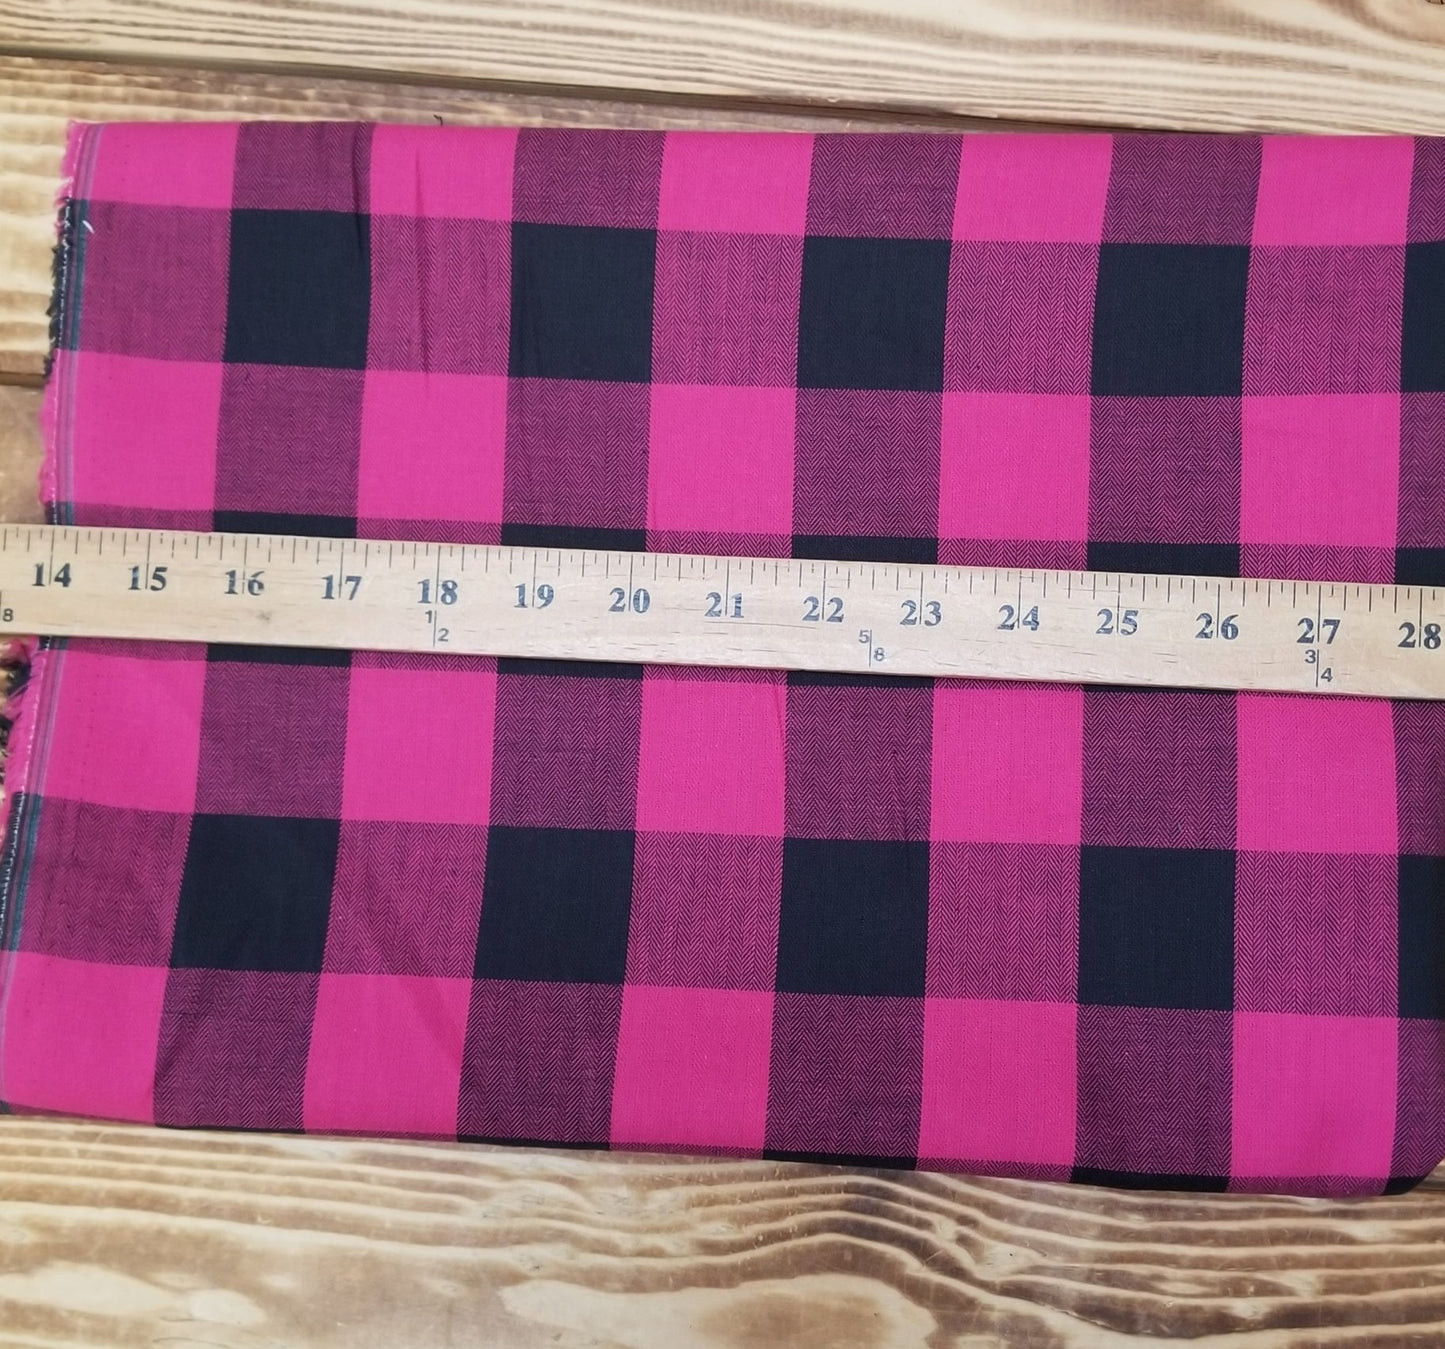 Designer Deadstock Cotton Herringbone Weave Shirting Buffalo Plaid Magenta and Black Woven- by the yard